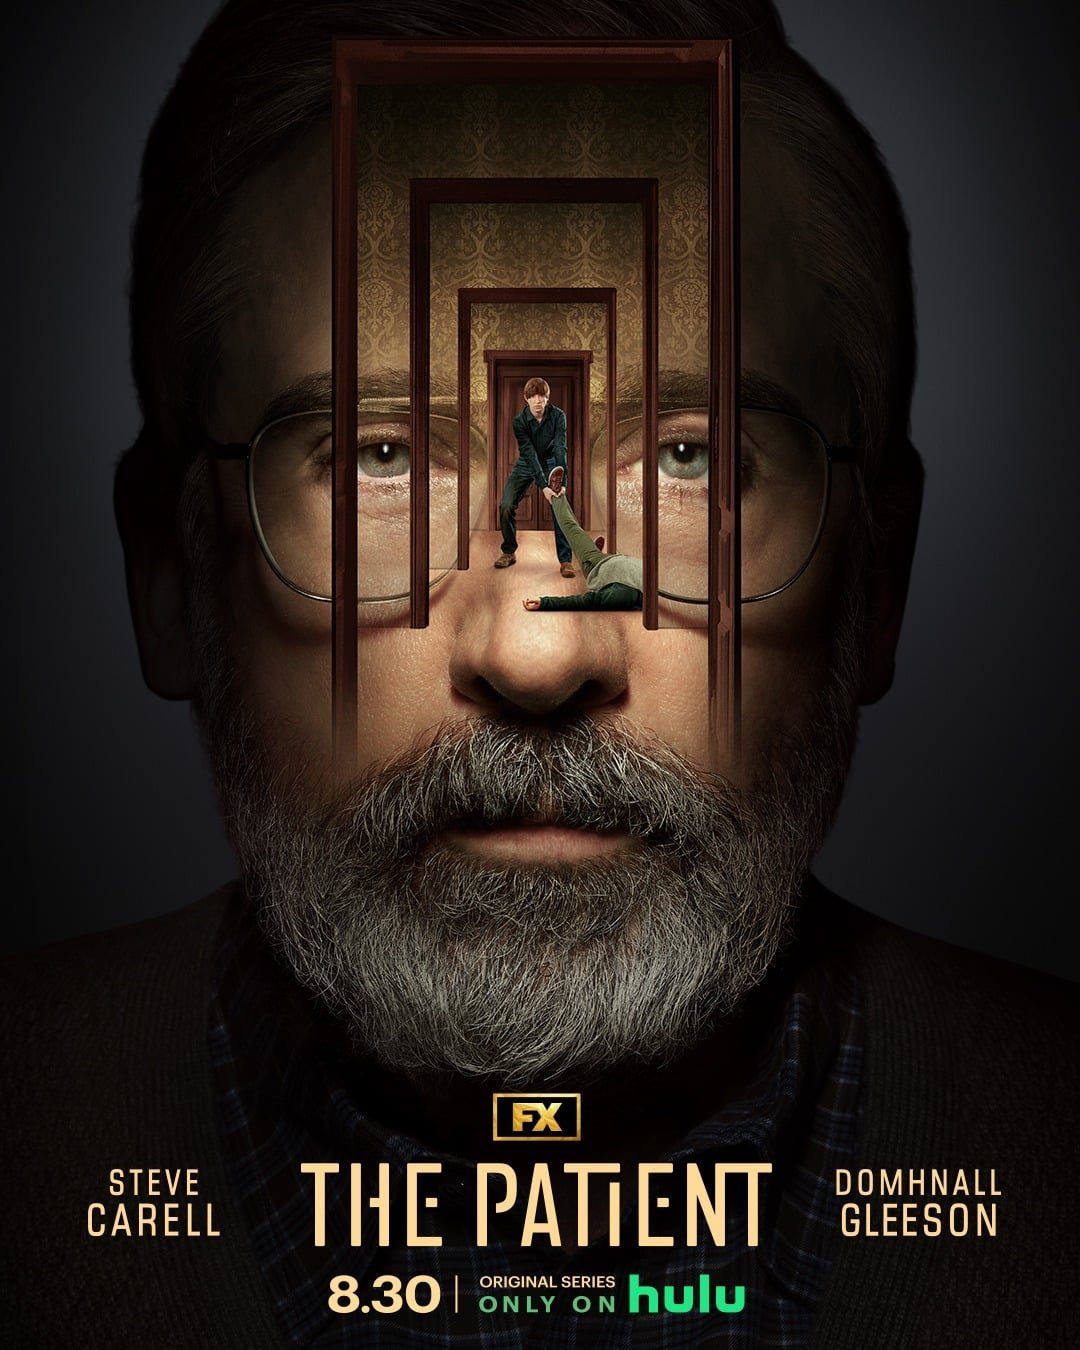 Where can I watch The Patient?